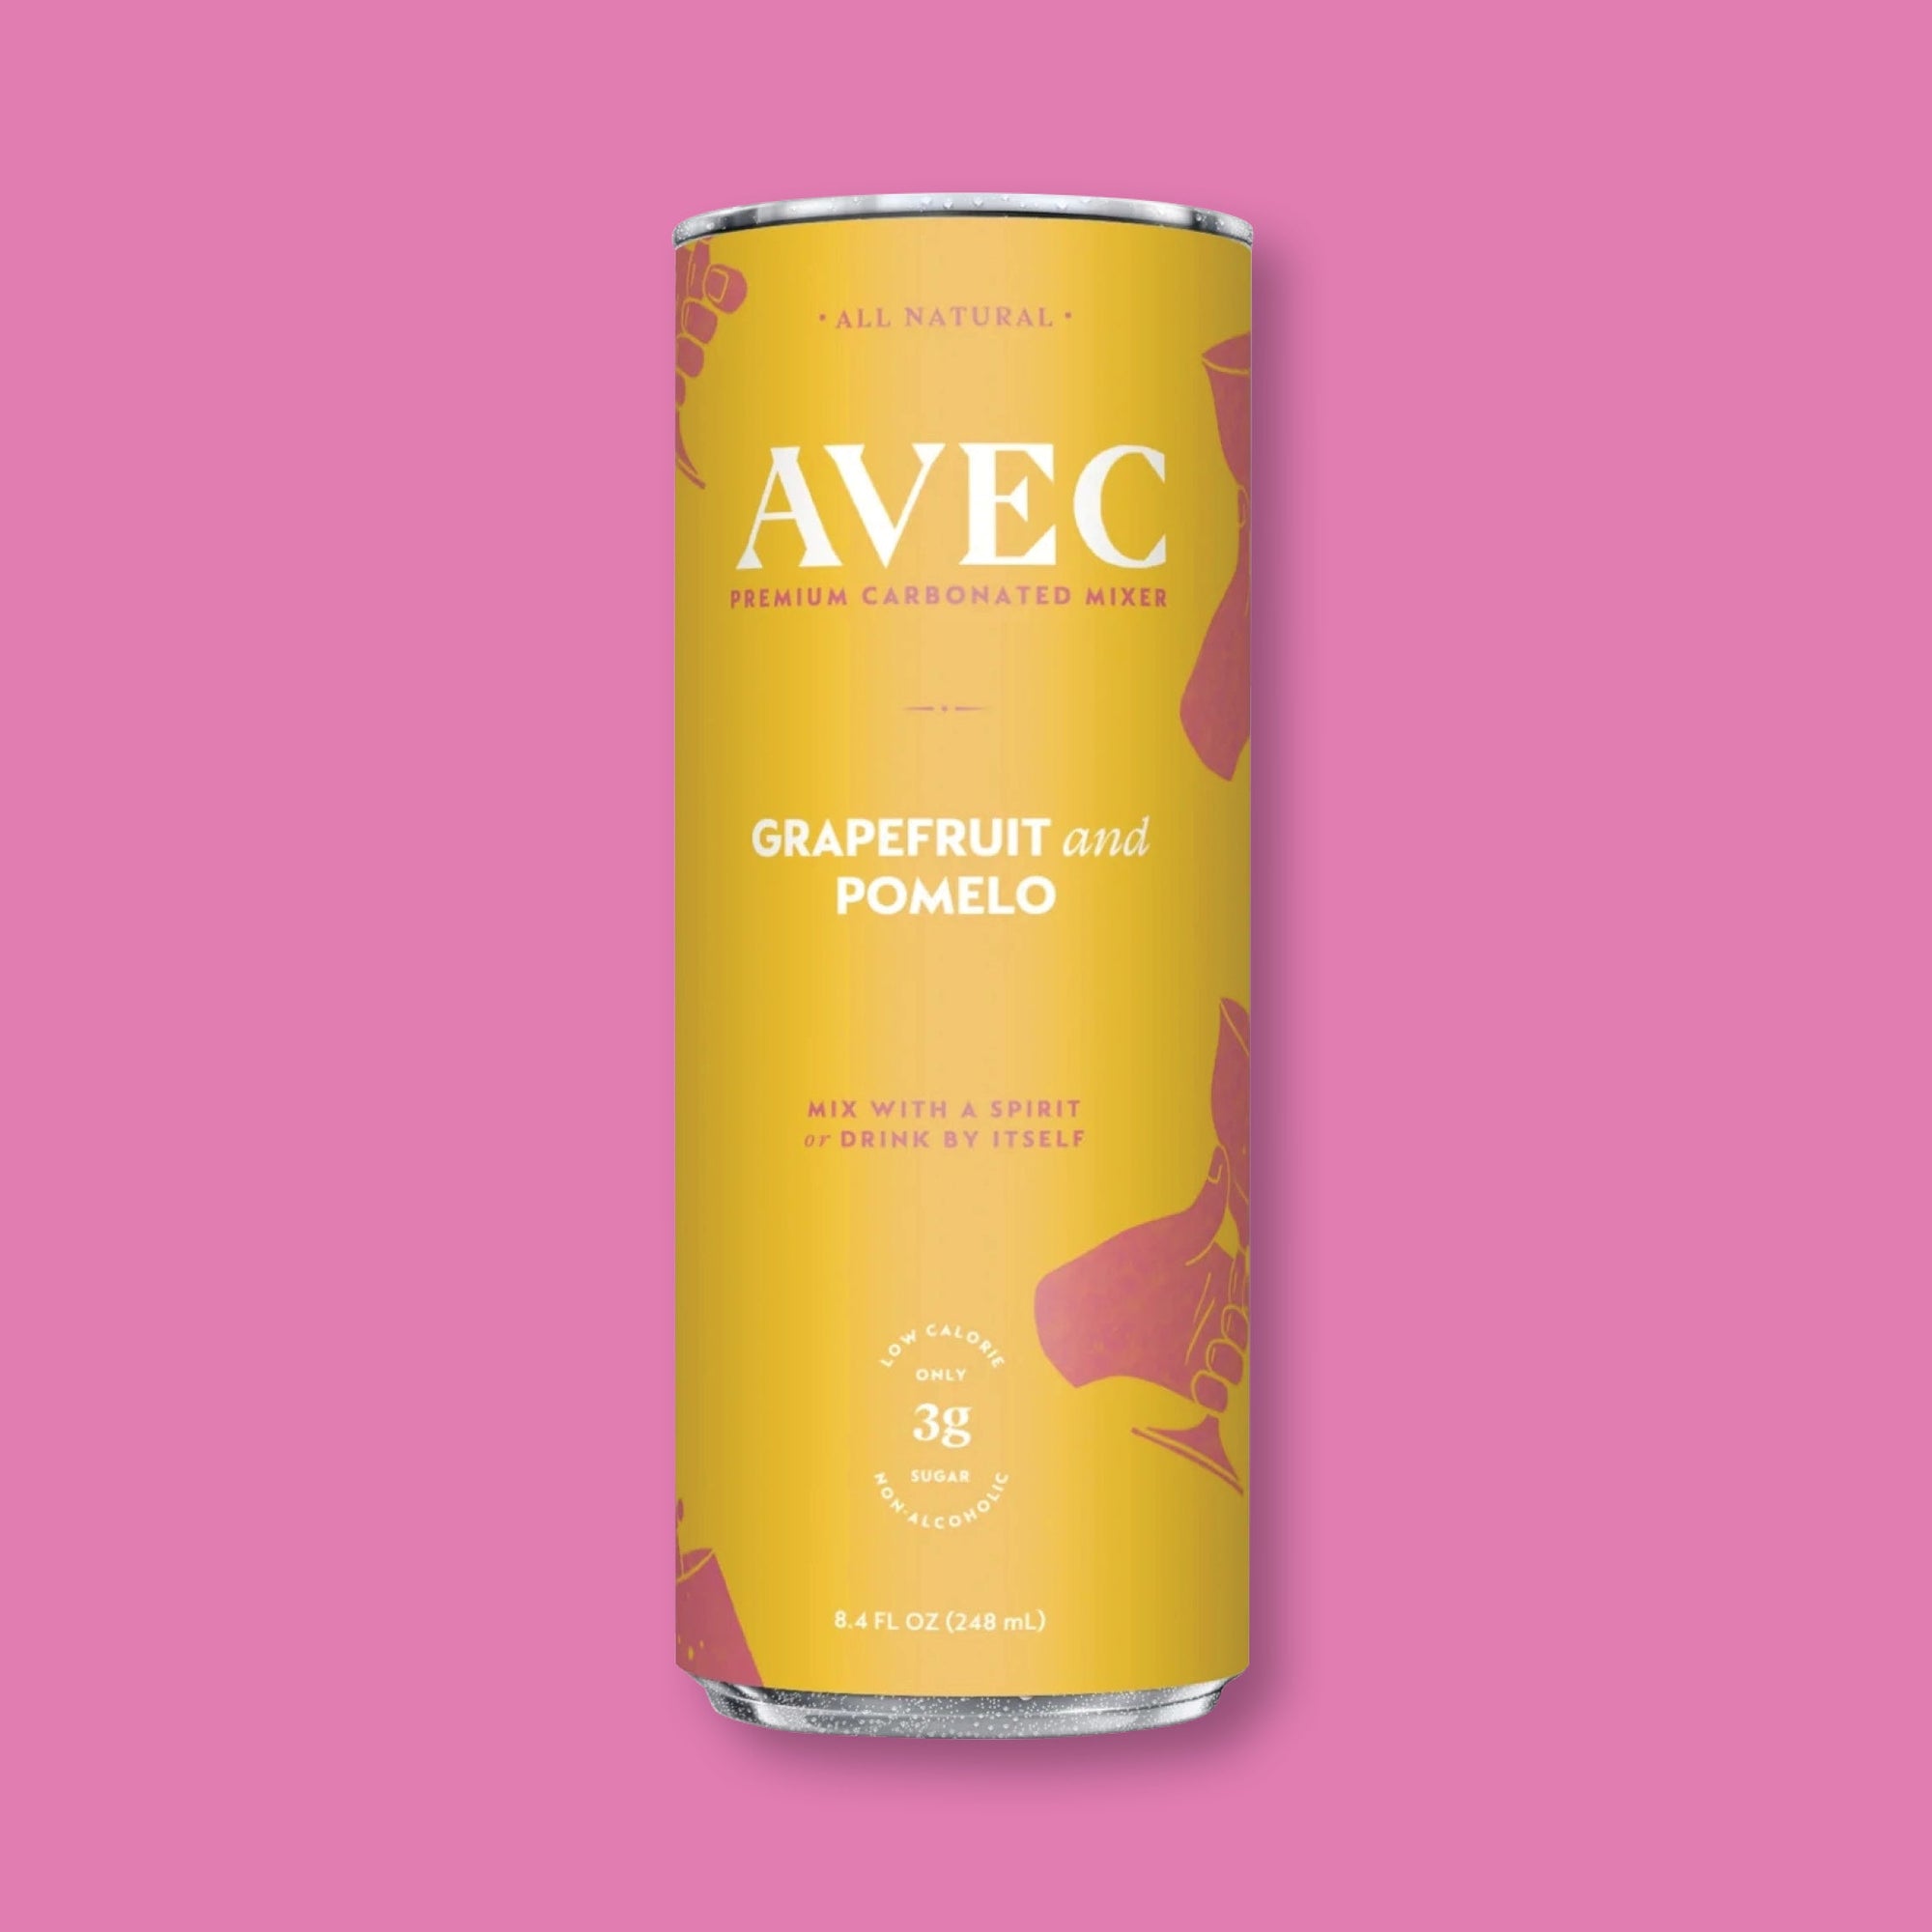 On a raspberry pink background sits a can. This sunny mustard can has illustrations of a hand holding a cocktail glass in a grapefruit color. This AVEC PREMIUM CARBONATED MIXER is "ALL NATURAL". The flavor is "GRAPEFRUIT and POMELO" and it says "MIX WITH A SPIRIT or DRINK BY ITSELF" in a grapefruit color, all caps font. LOW CALORIE, NON-ALCHOLIC, ONLY 3G SUGAR, 8.4 FL OZ (248 mL)